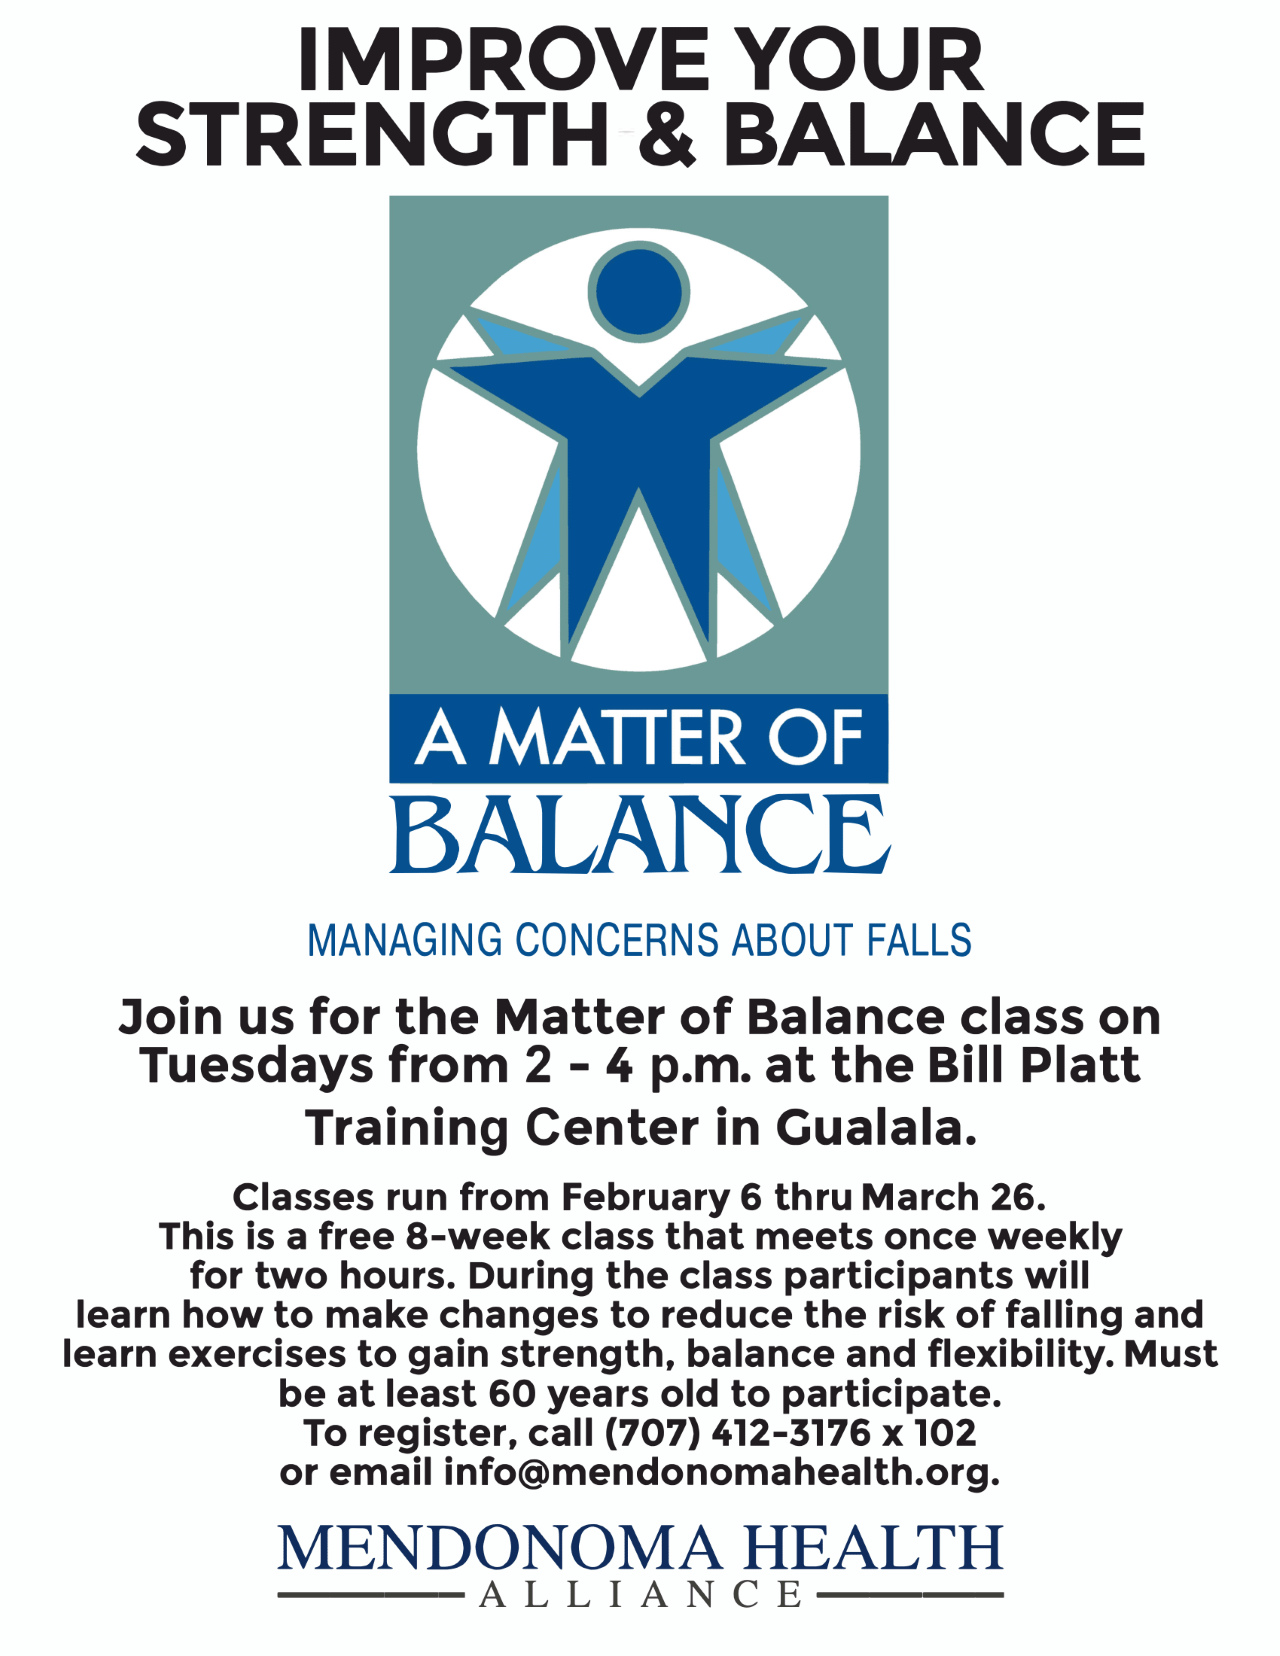 Matter of Balance Class Flyer managing concerns about falls & improve your strength & balance. Round blue circle with green trim above a star shape, person looking, figure in dark blue and light blue.